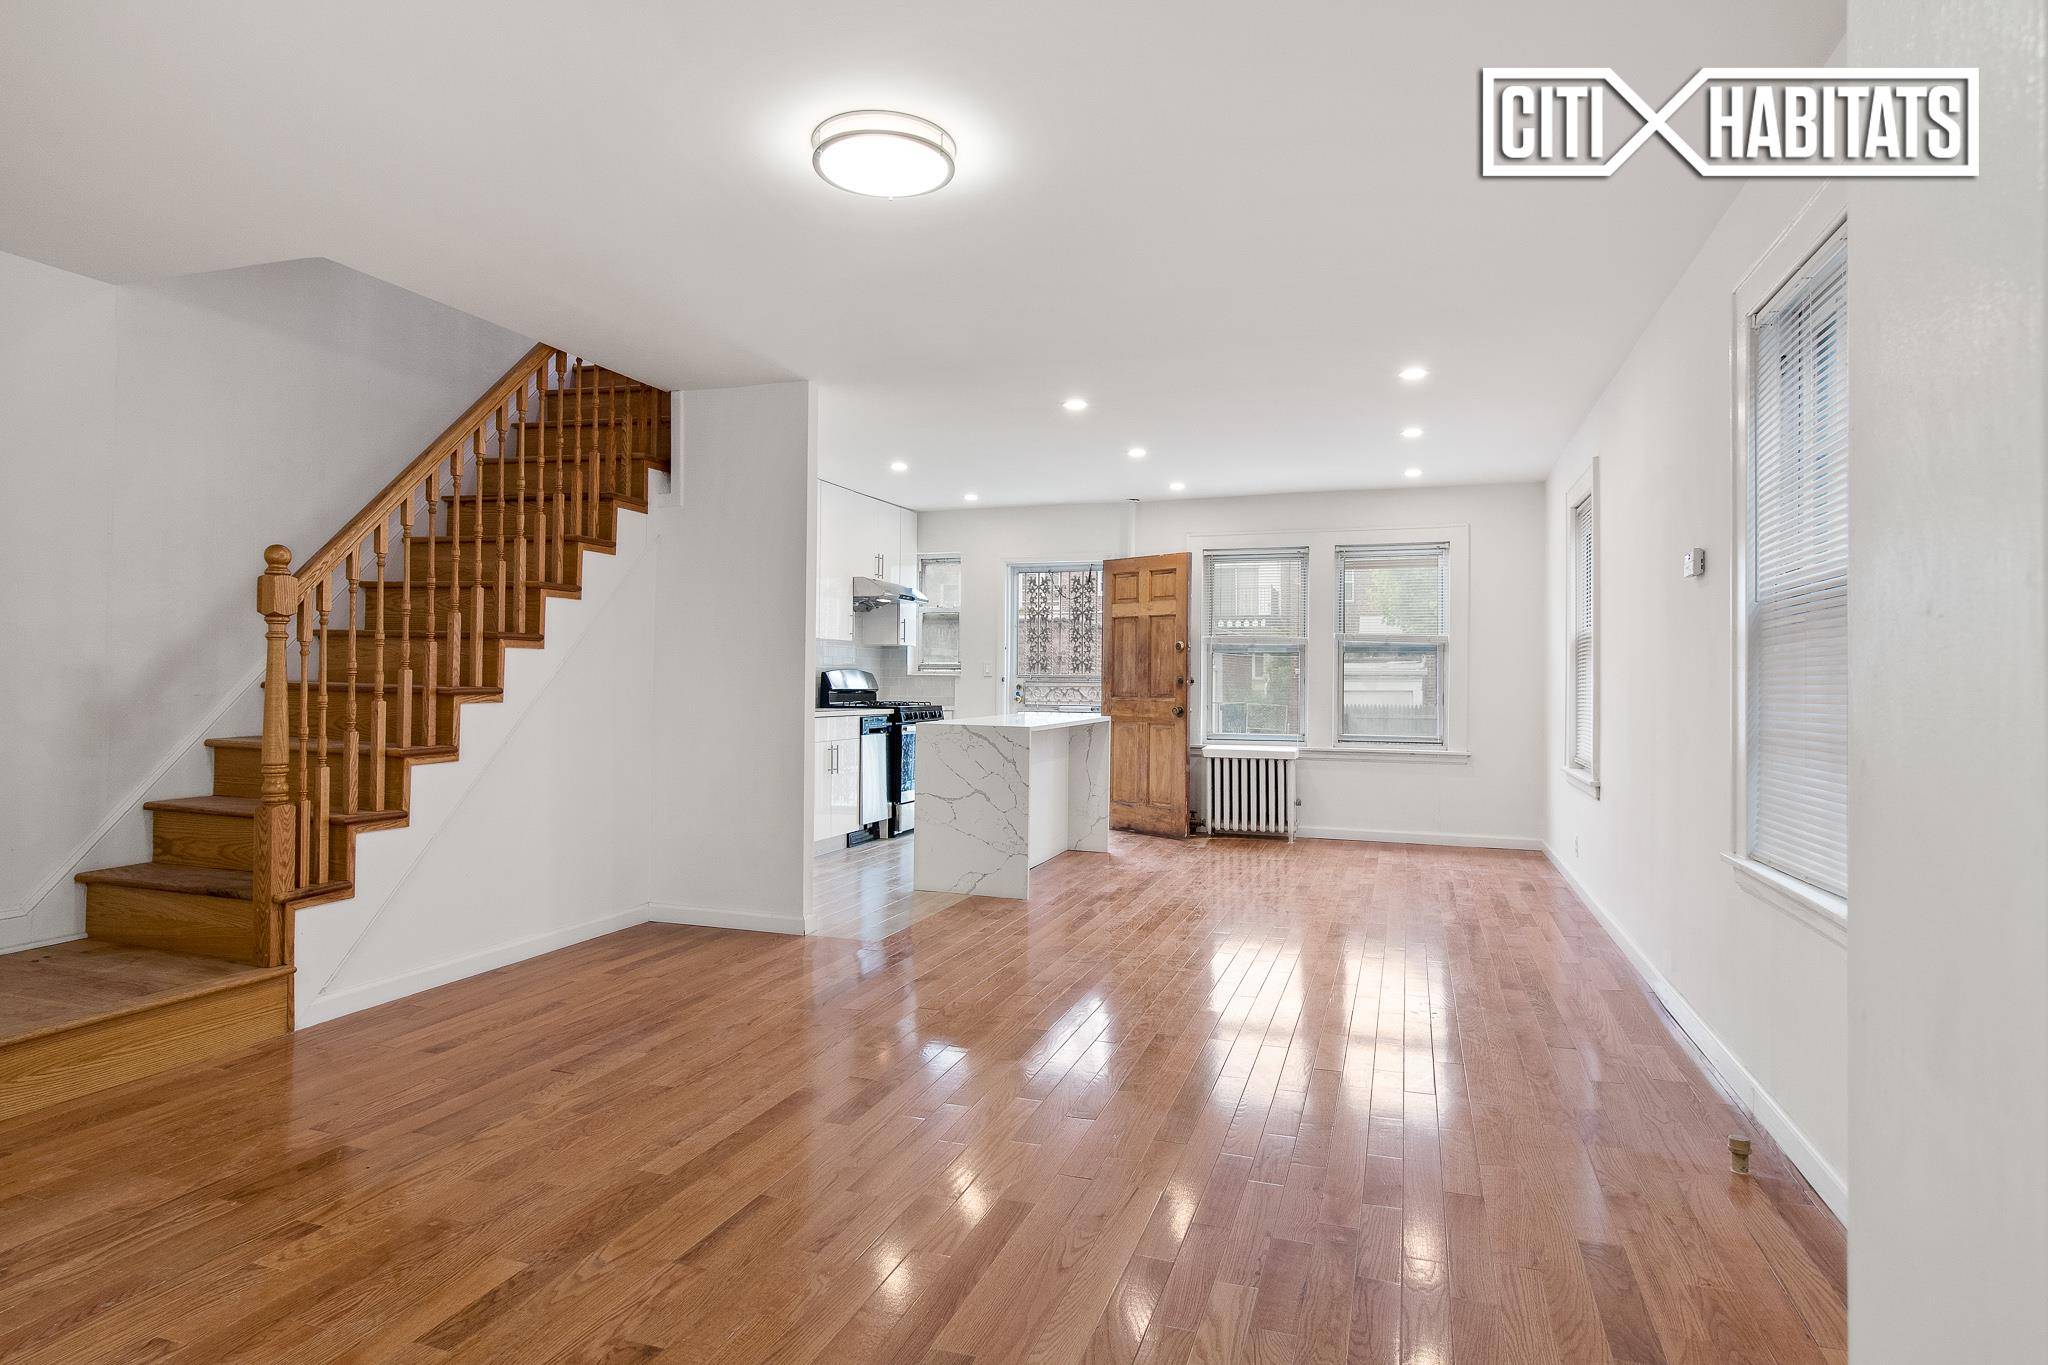 Brand new, gut renovated and sprawling three bedroom three bathroom house with separate exit and entrance in the basement in vibrant Forest Hills neighborhood !